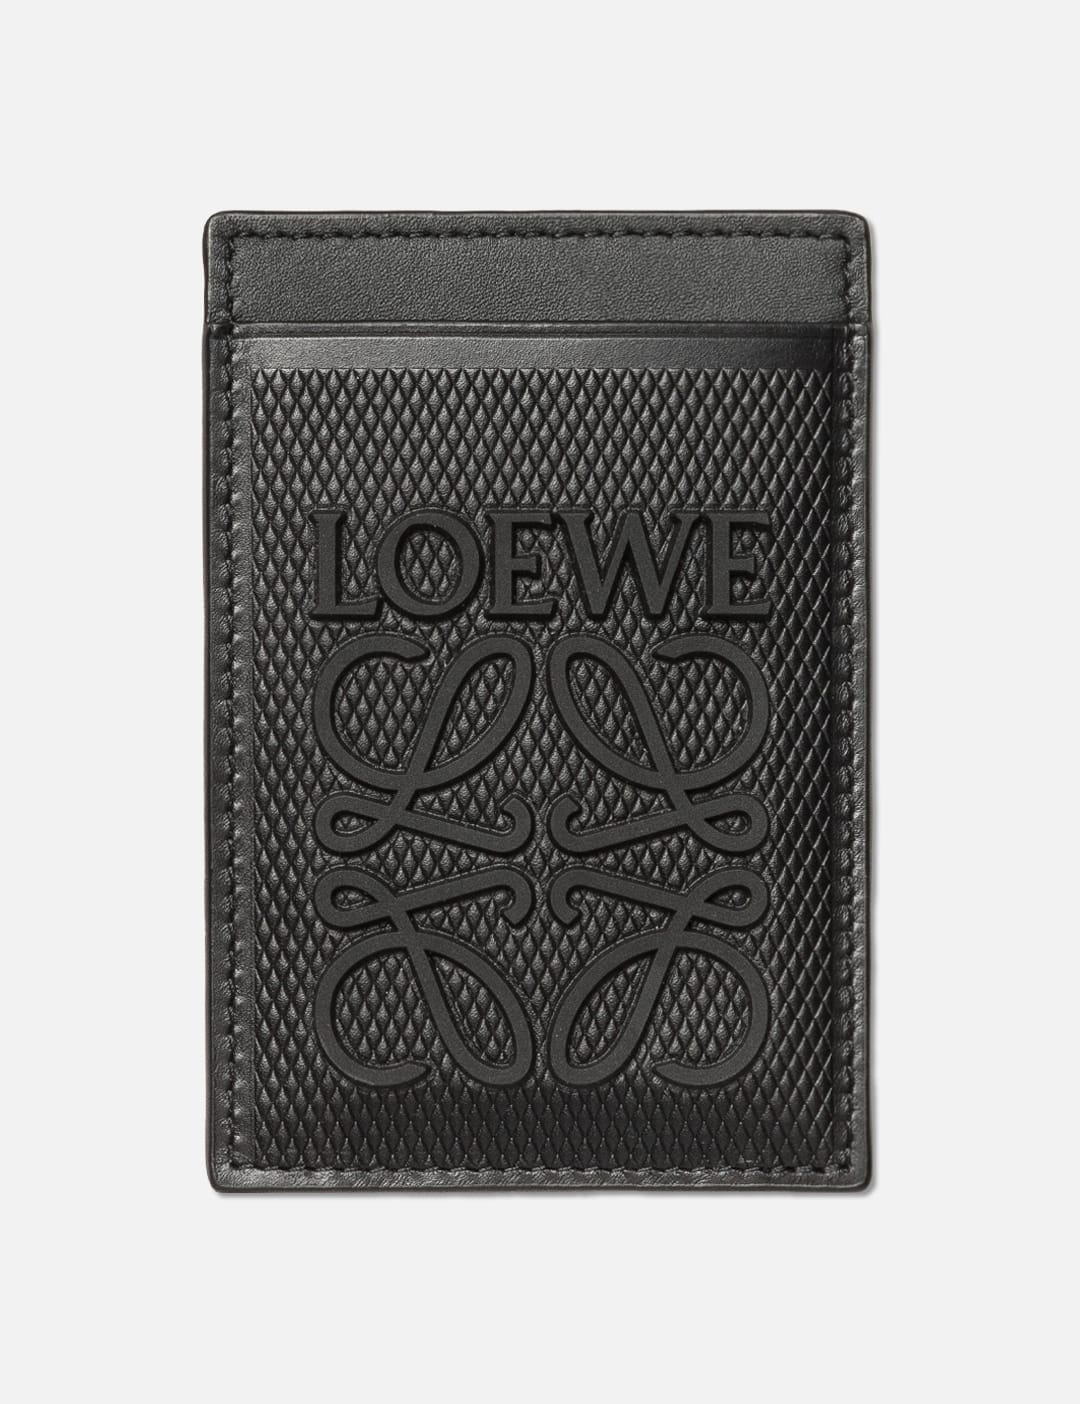 Human Made - MILITARY CARD CASE | HBX - Globally Curated Fashion 